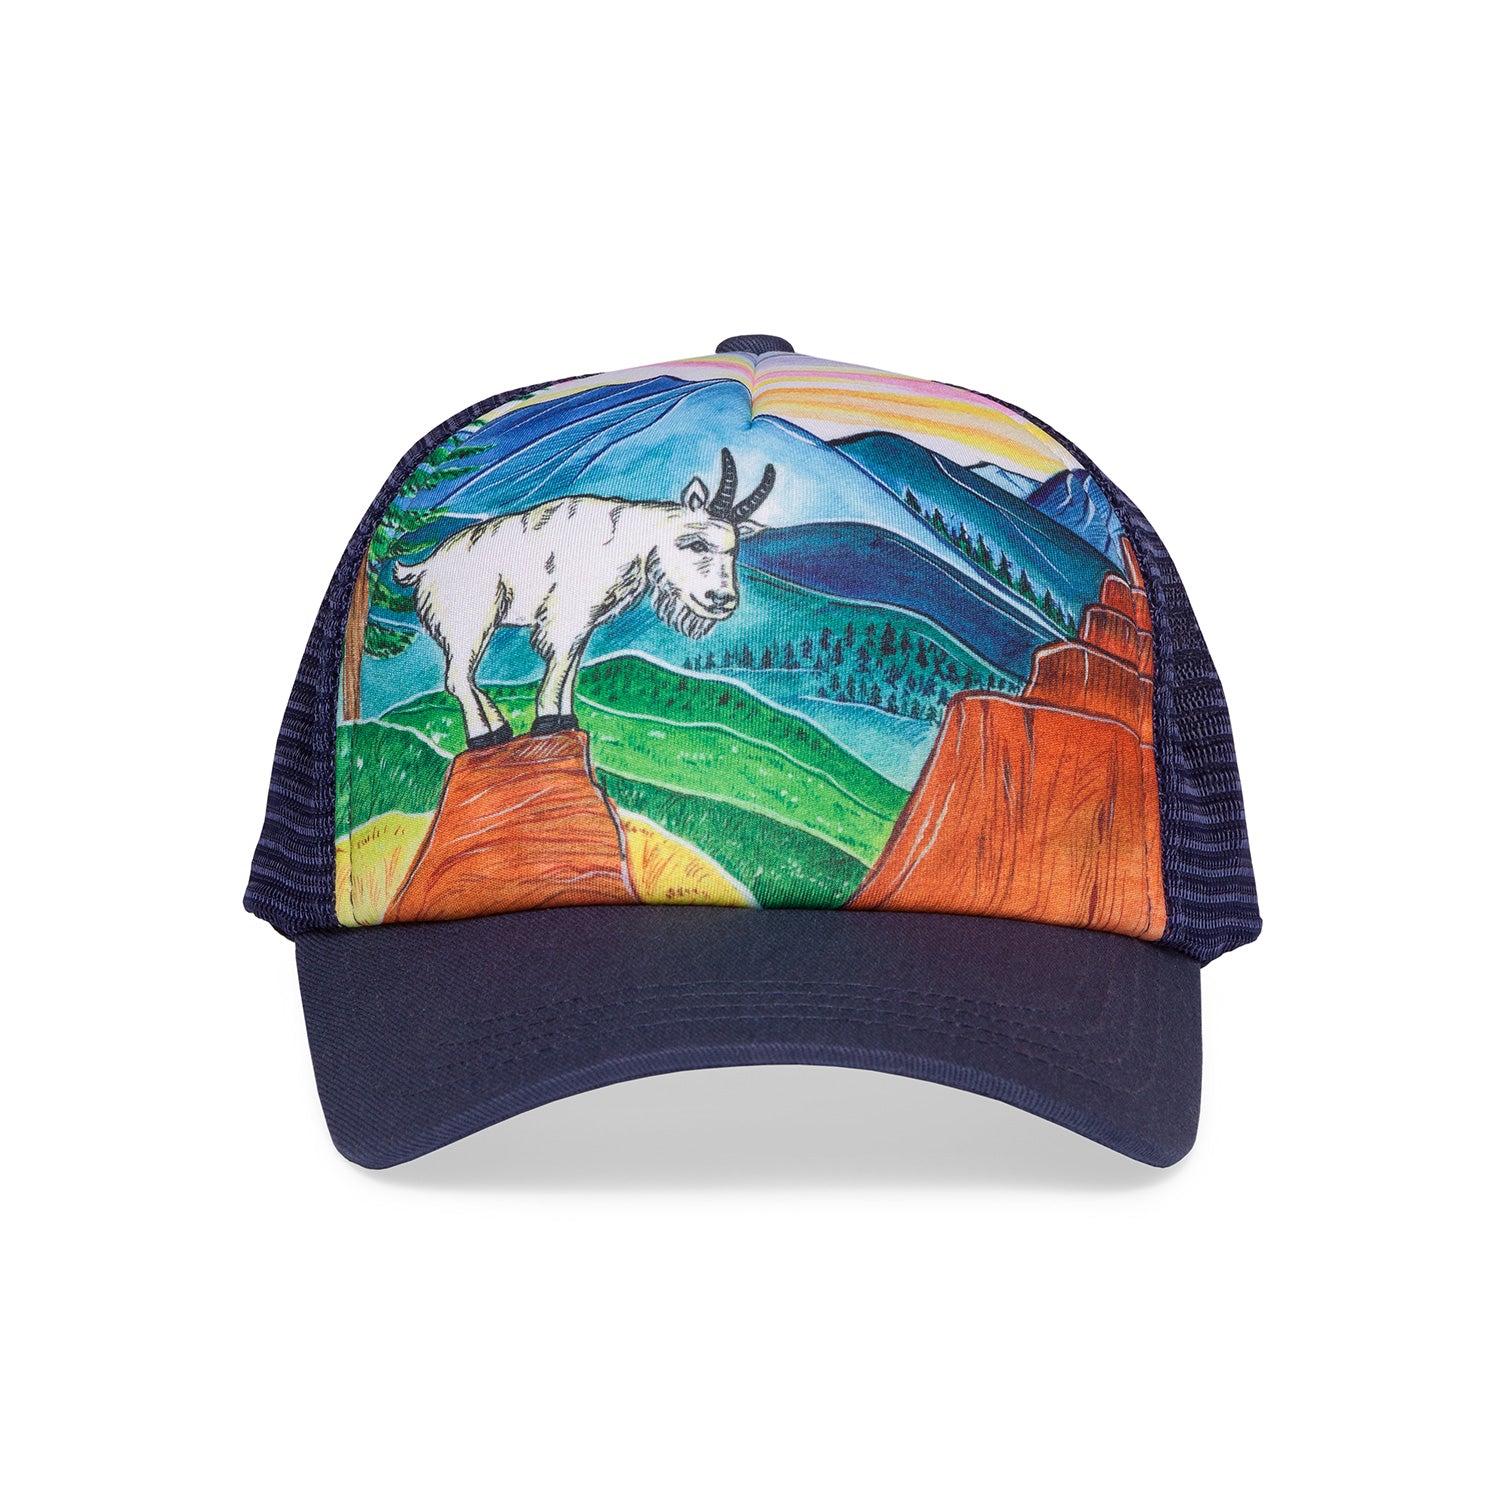 Sunday Afternoons Mountain Goat Kids Trucker